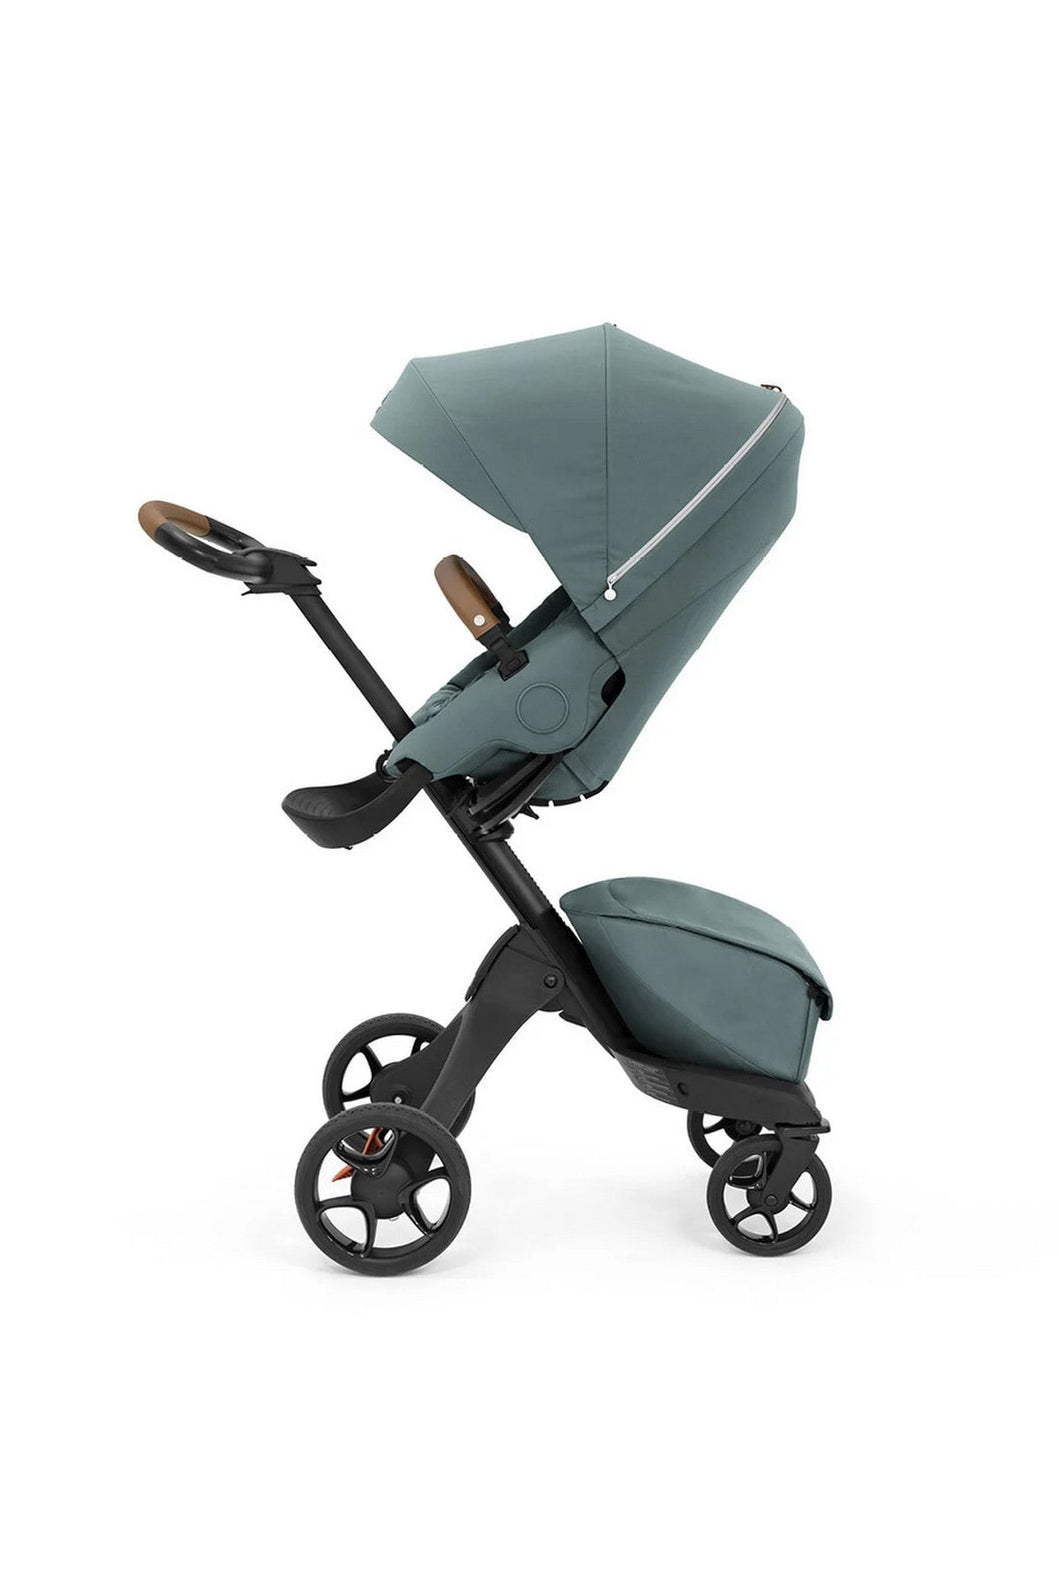 Stokke® Xplory® X Gold Limited Edition – MAMS